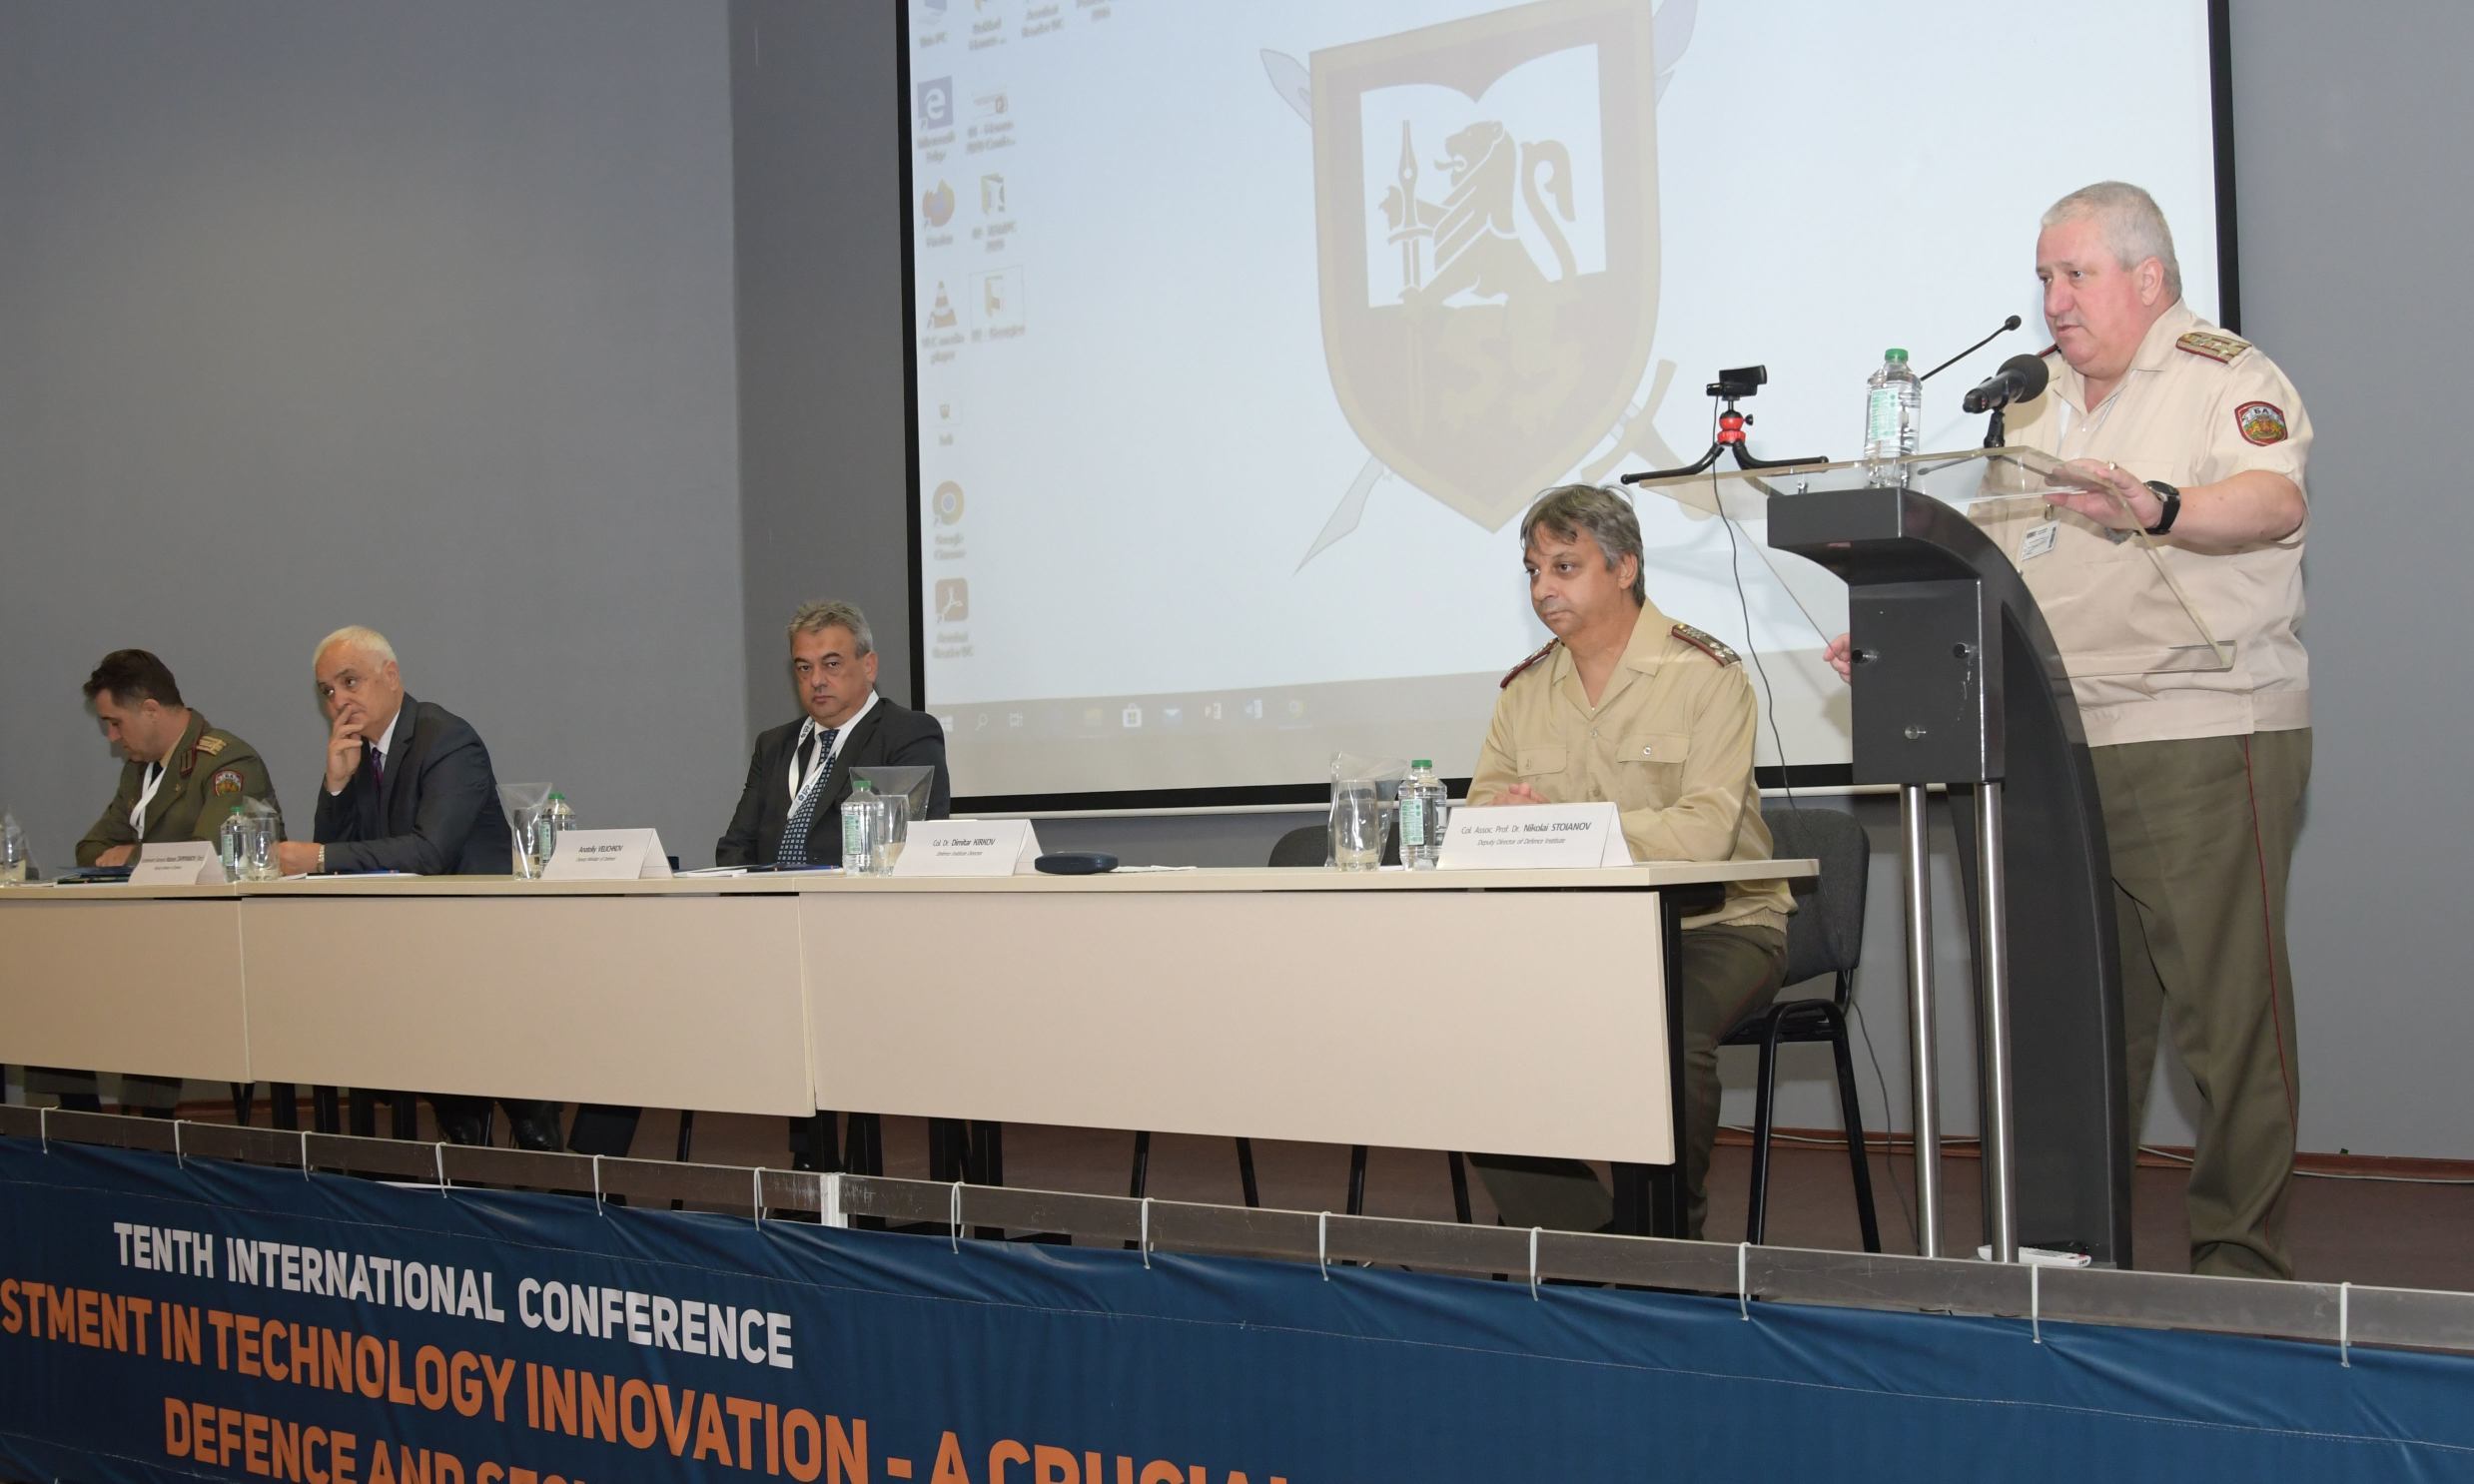 Opening of the conference